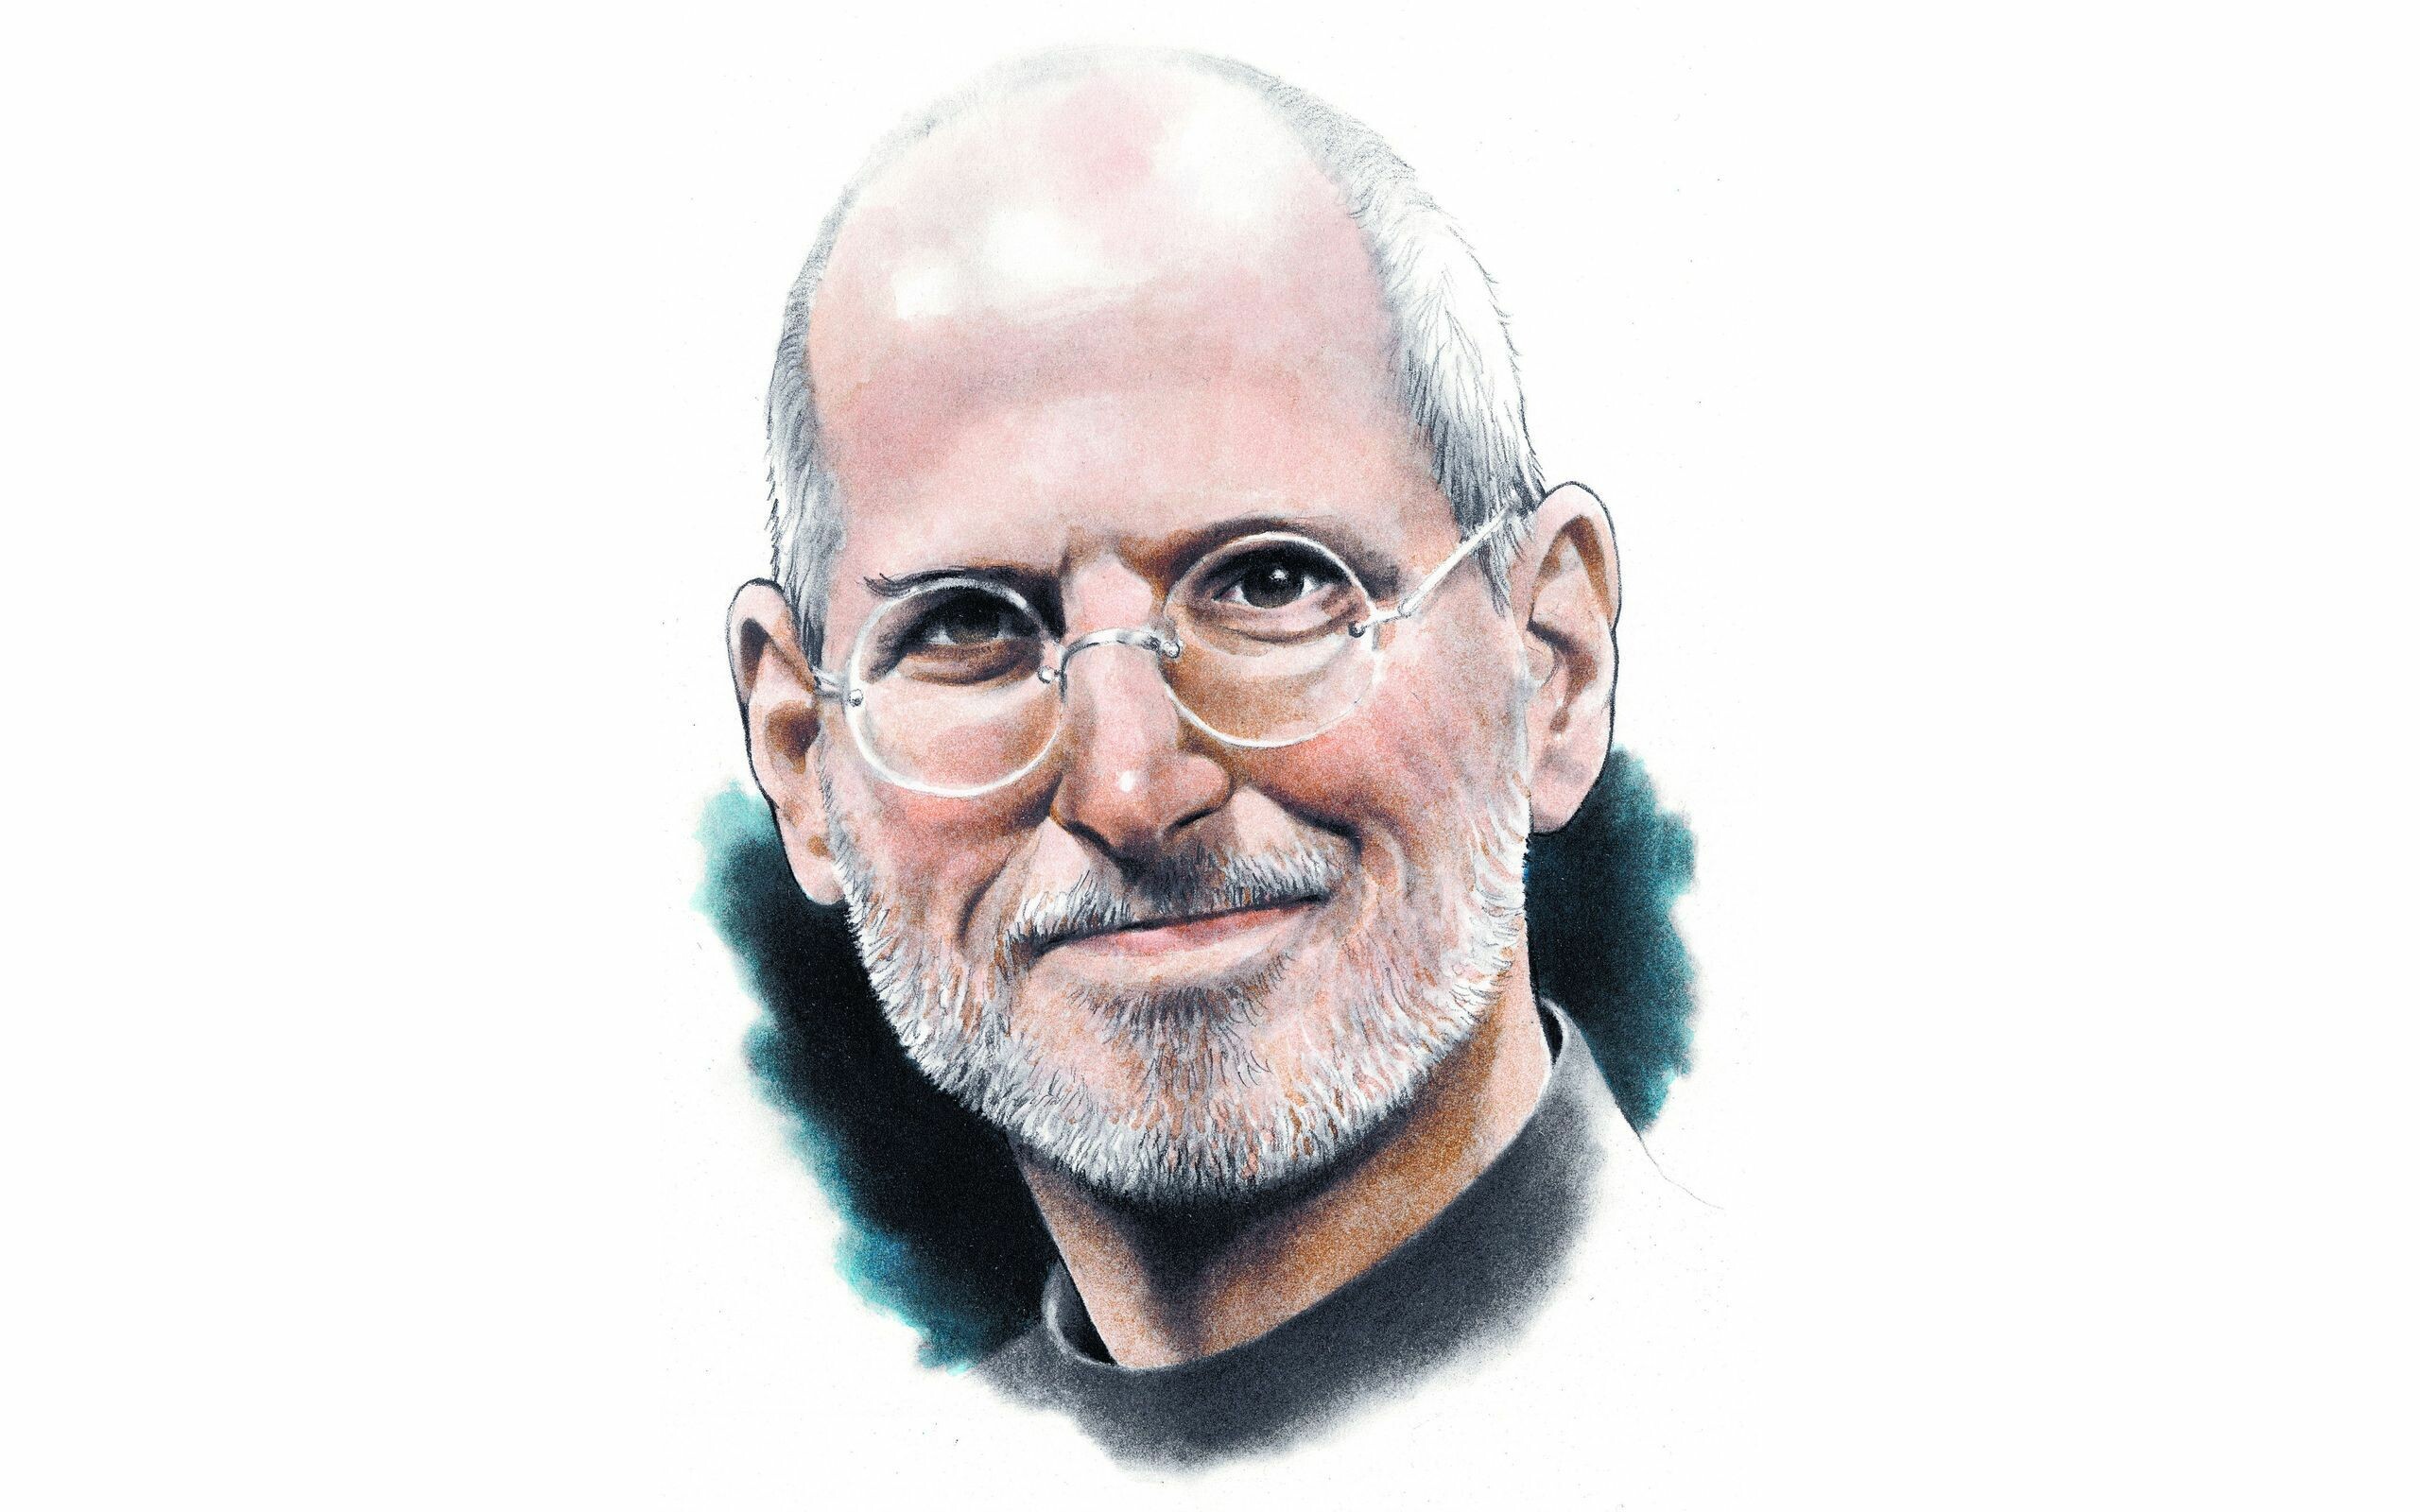 Steve Jobs: Co-founded and served as chief executive of Pixar Animation Studios, A member of the board of directors of The Walt Disney Company. 2560x1600 HD Background.